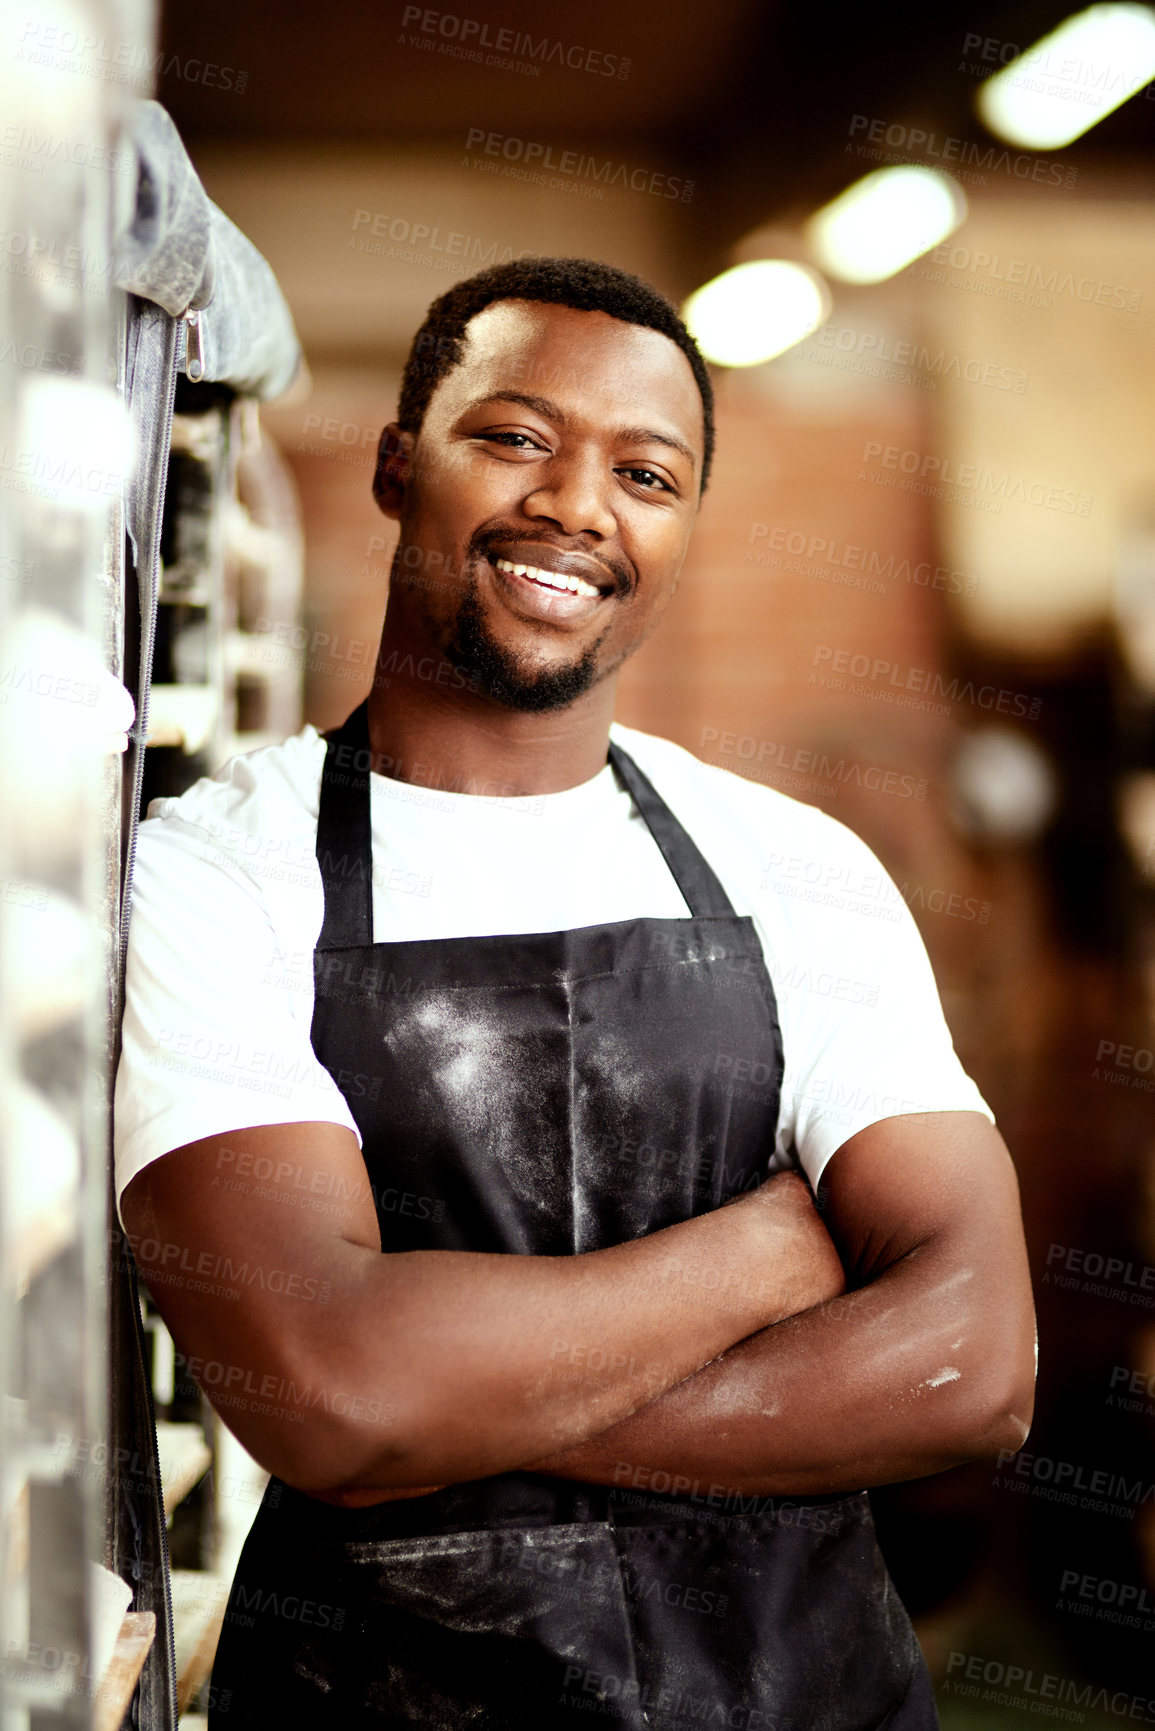 Buy stock photo Shot of a confident young man working in a bakery